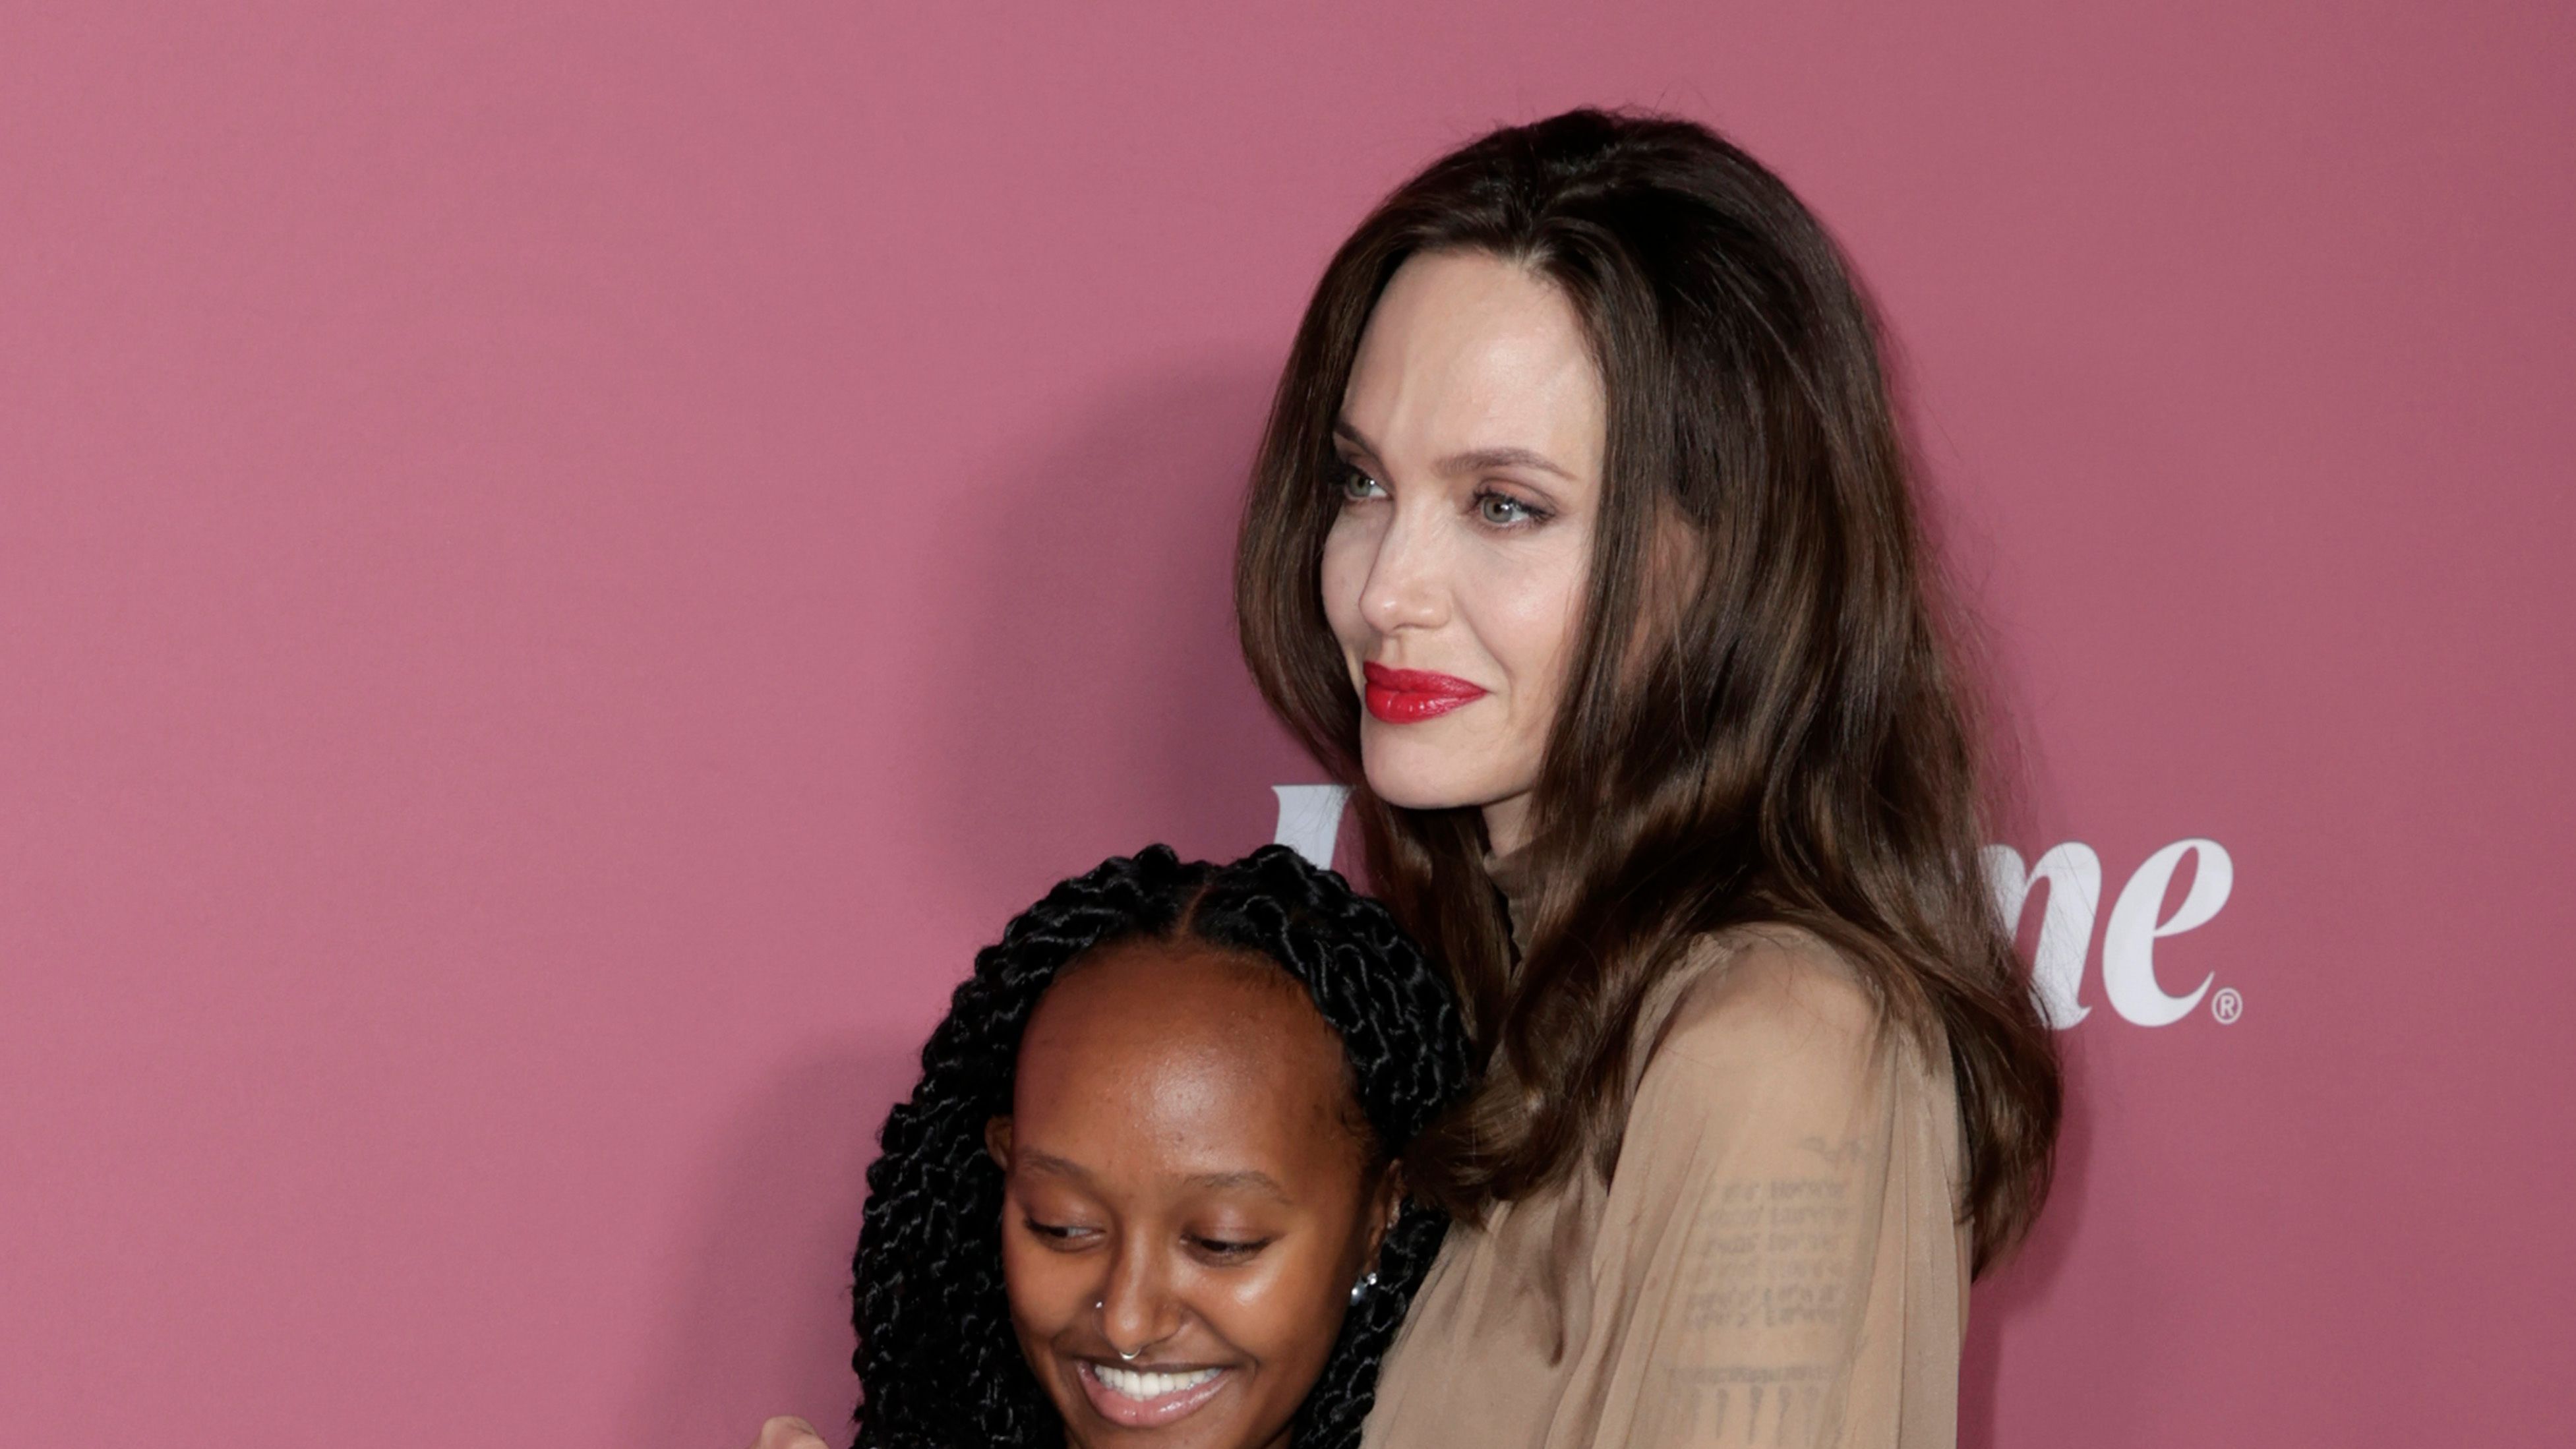 Angelina Jolie is the picture of elegance for rare night out with